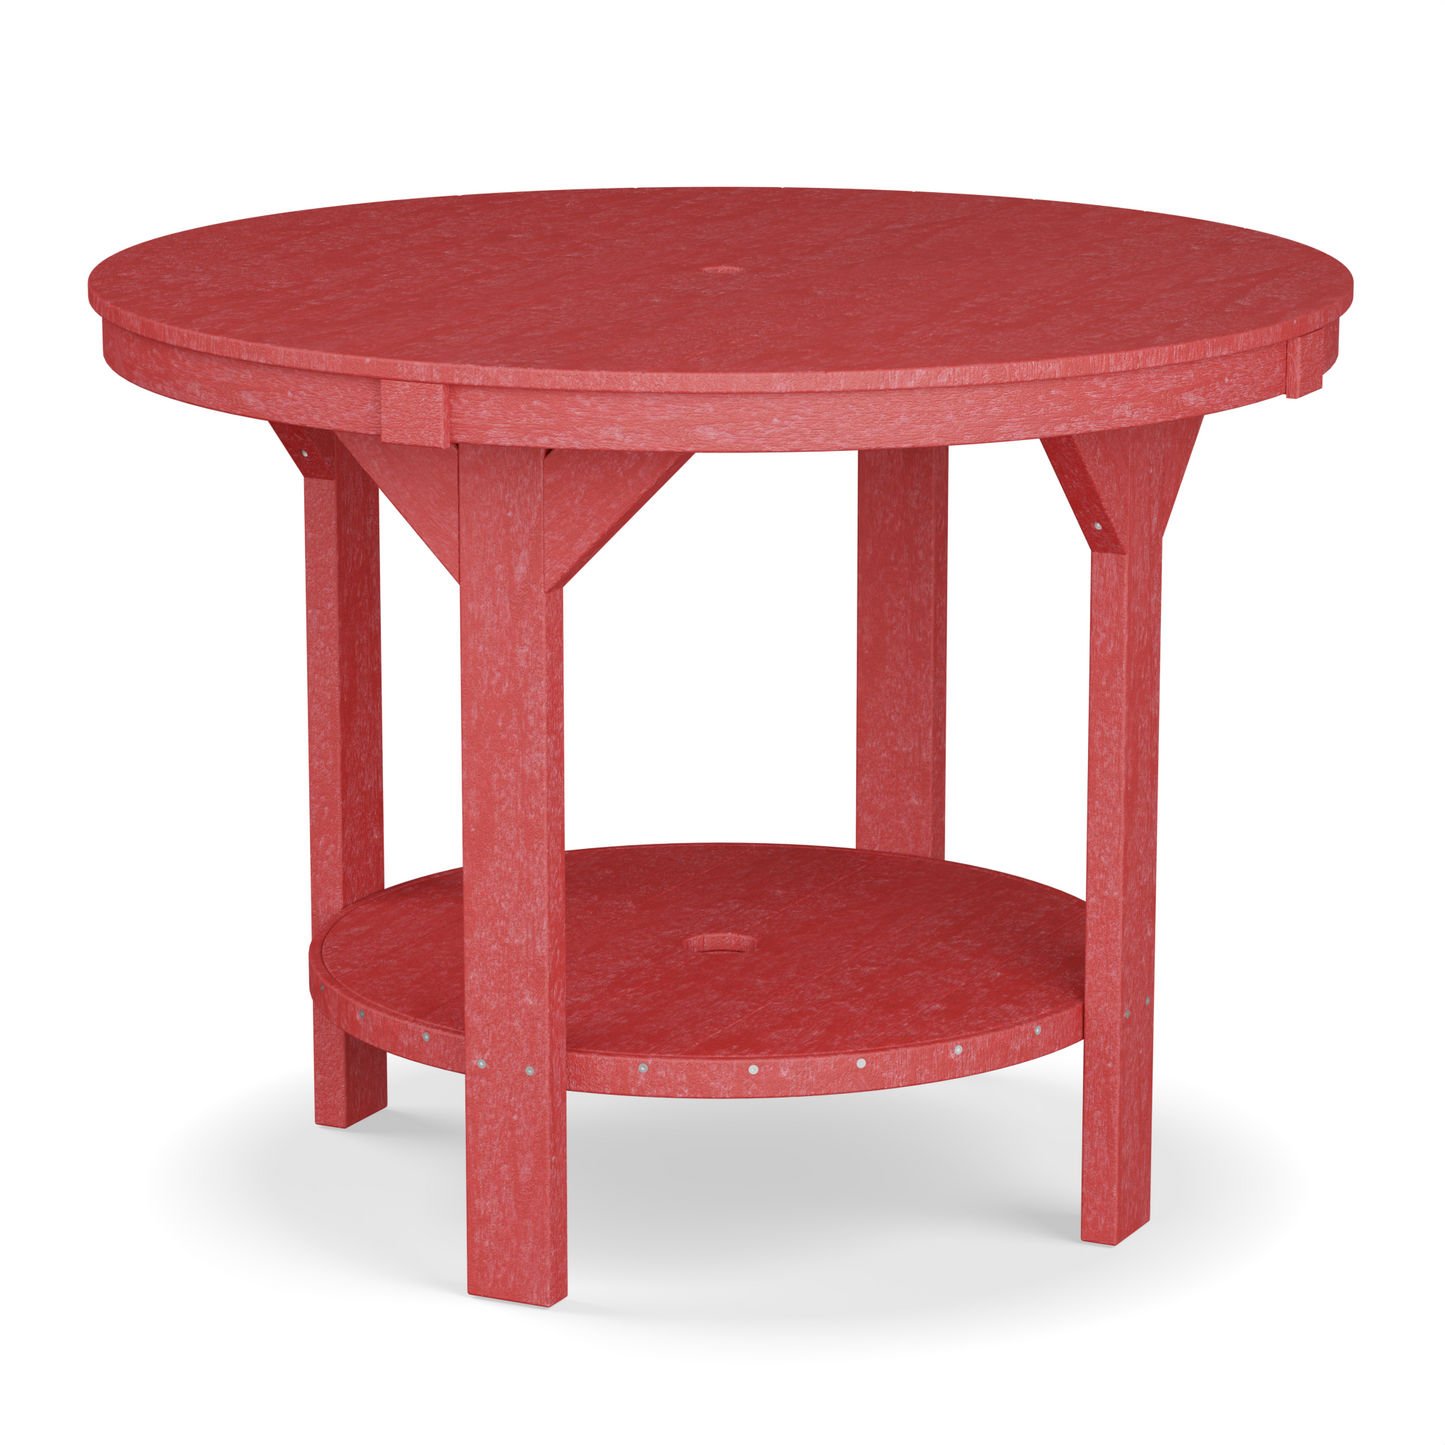 Wildridge Heritage Outdoor Recycled Plastic 48” Pub Table (Counter Height ) - LEAD TIME TO SHIP 6 WEEKS OR LESS